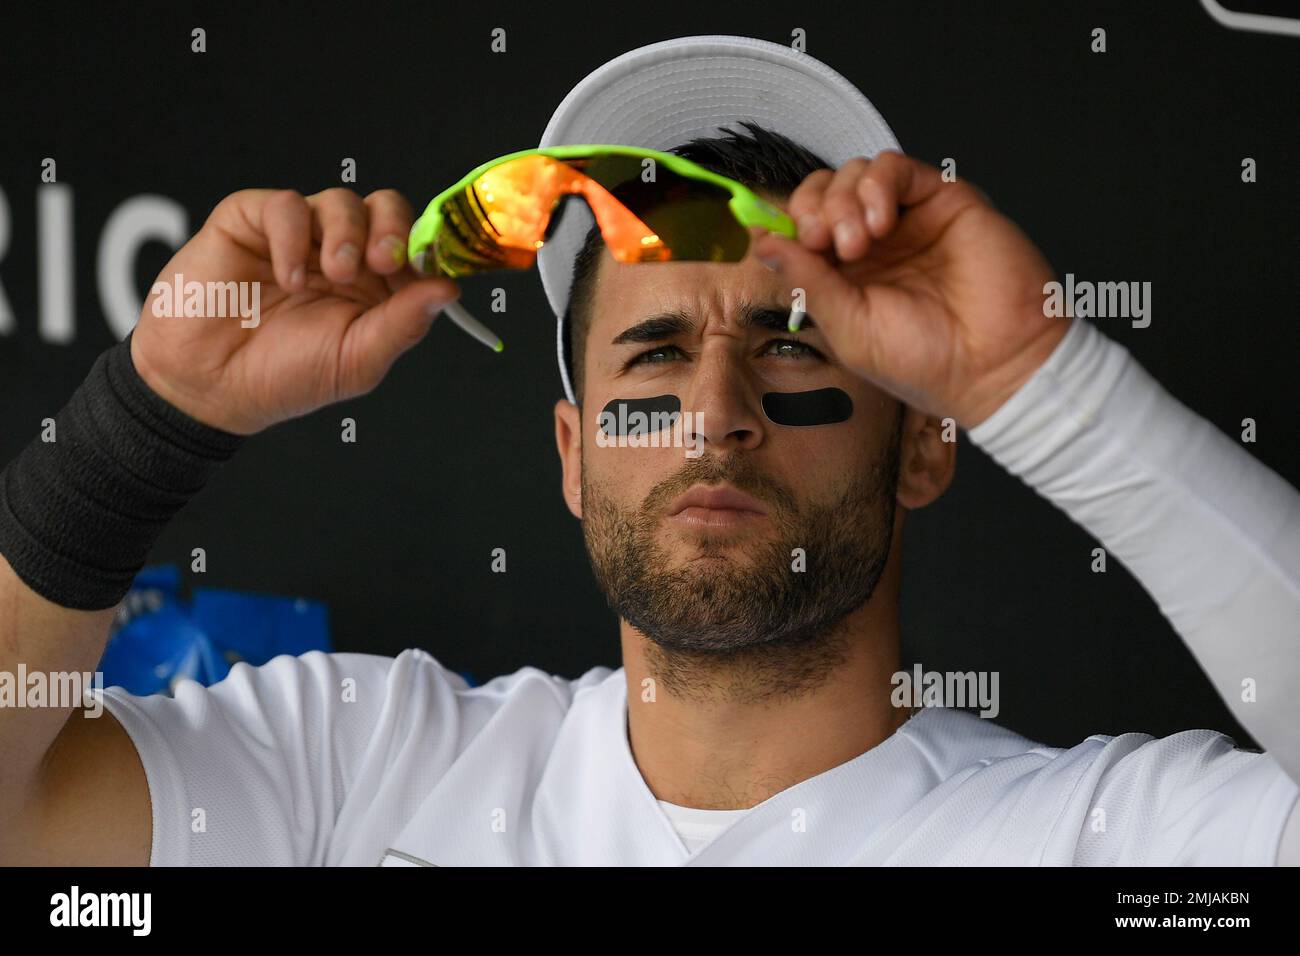 Tampa Bay Rays' Kevin Kiermaier puts on his sunglasses before a